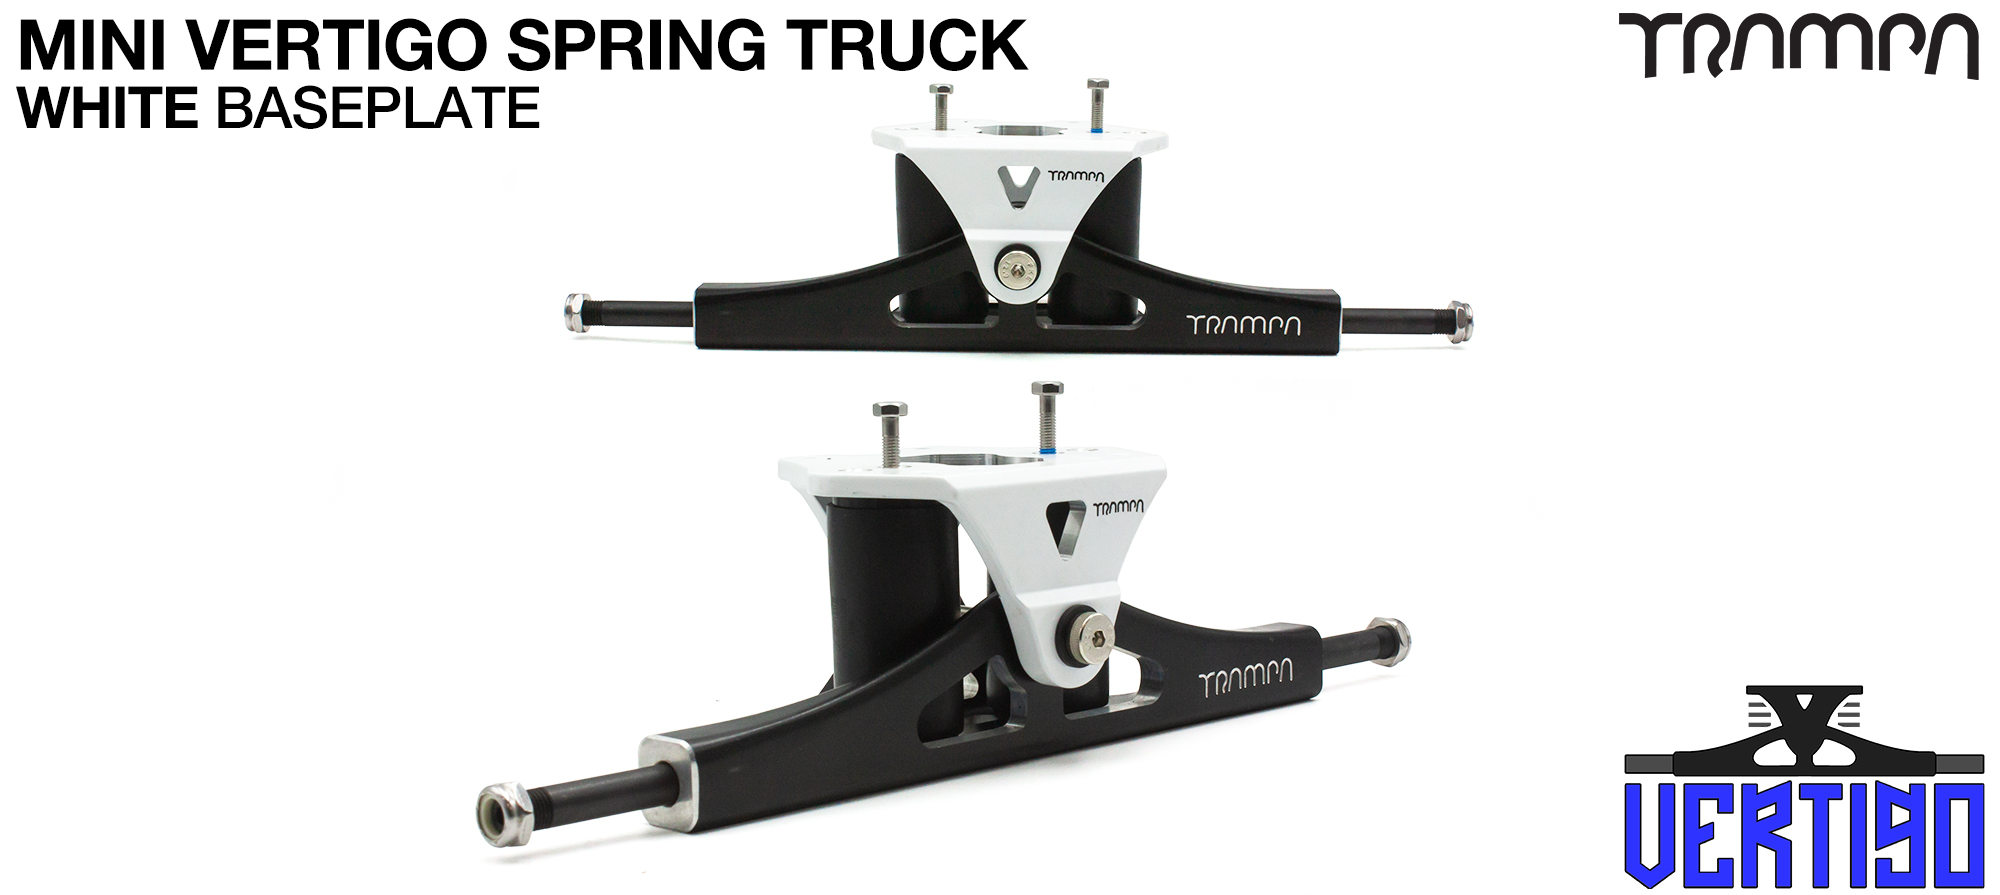 Mini VERTIGO TRAMPA TRUCKS - CNC FORGED Channel Hanger with 9.525mm HOLLOW Steel Axle CNC Baseplate Stainless Steel Kingpin - WHITE